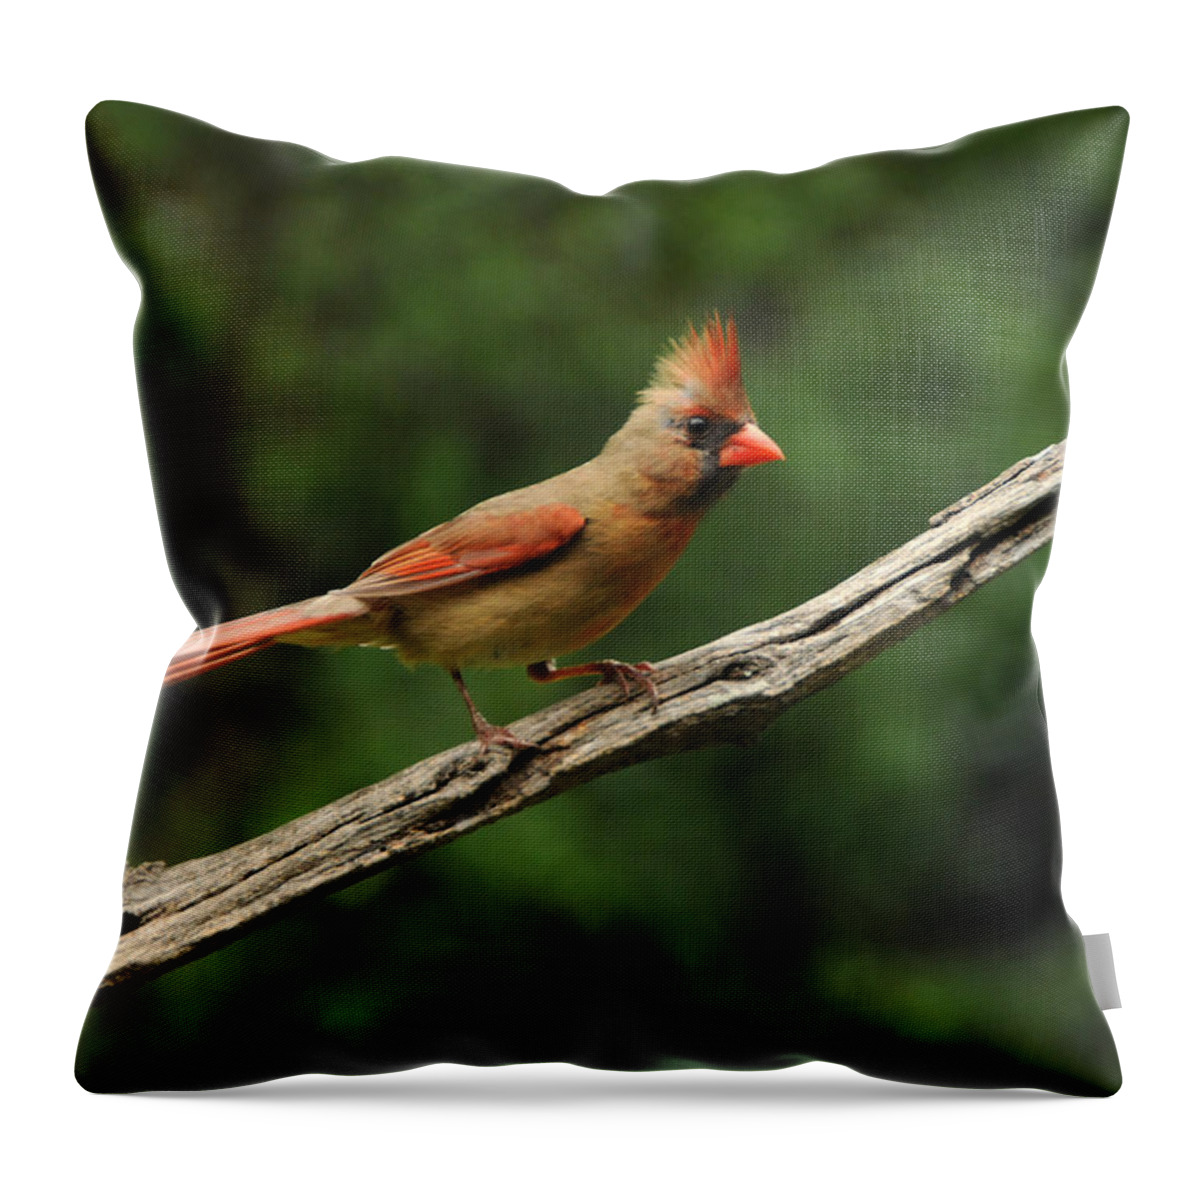 Female Throw Pillow featuring the photograph Juvenile Female Cardinal by Mike Martin